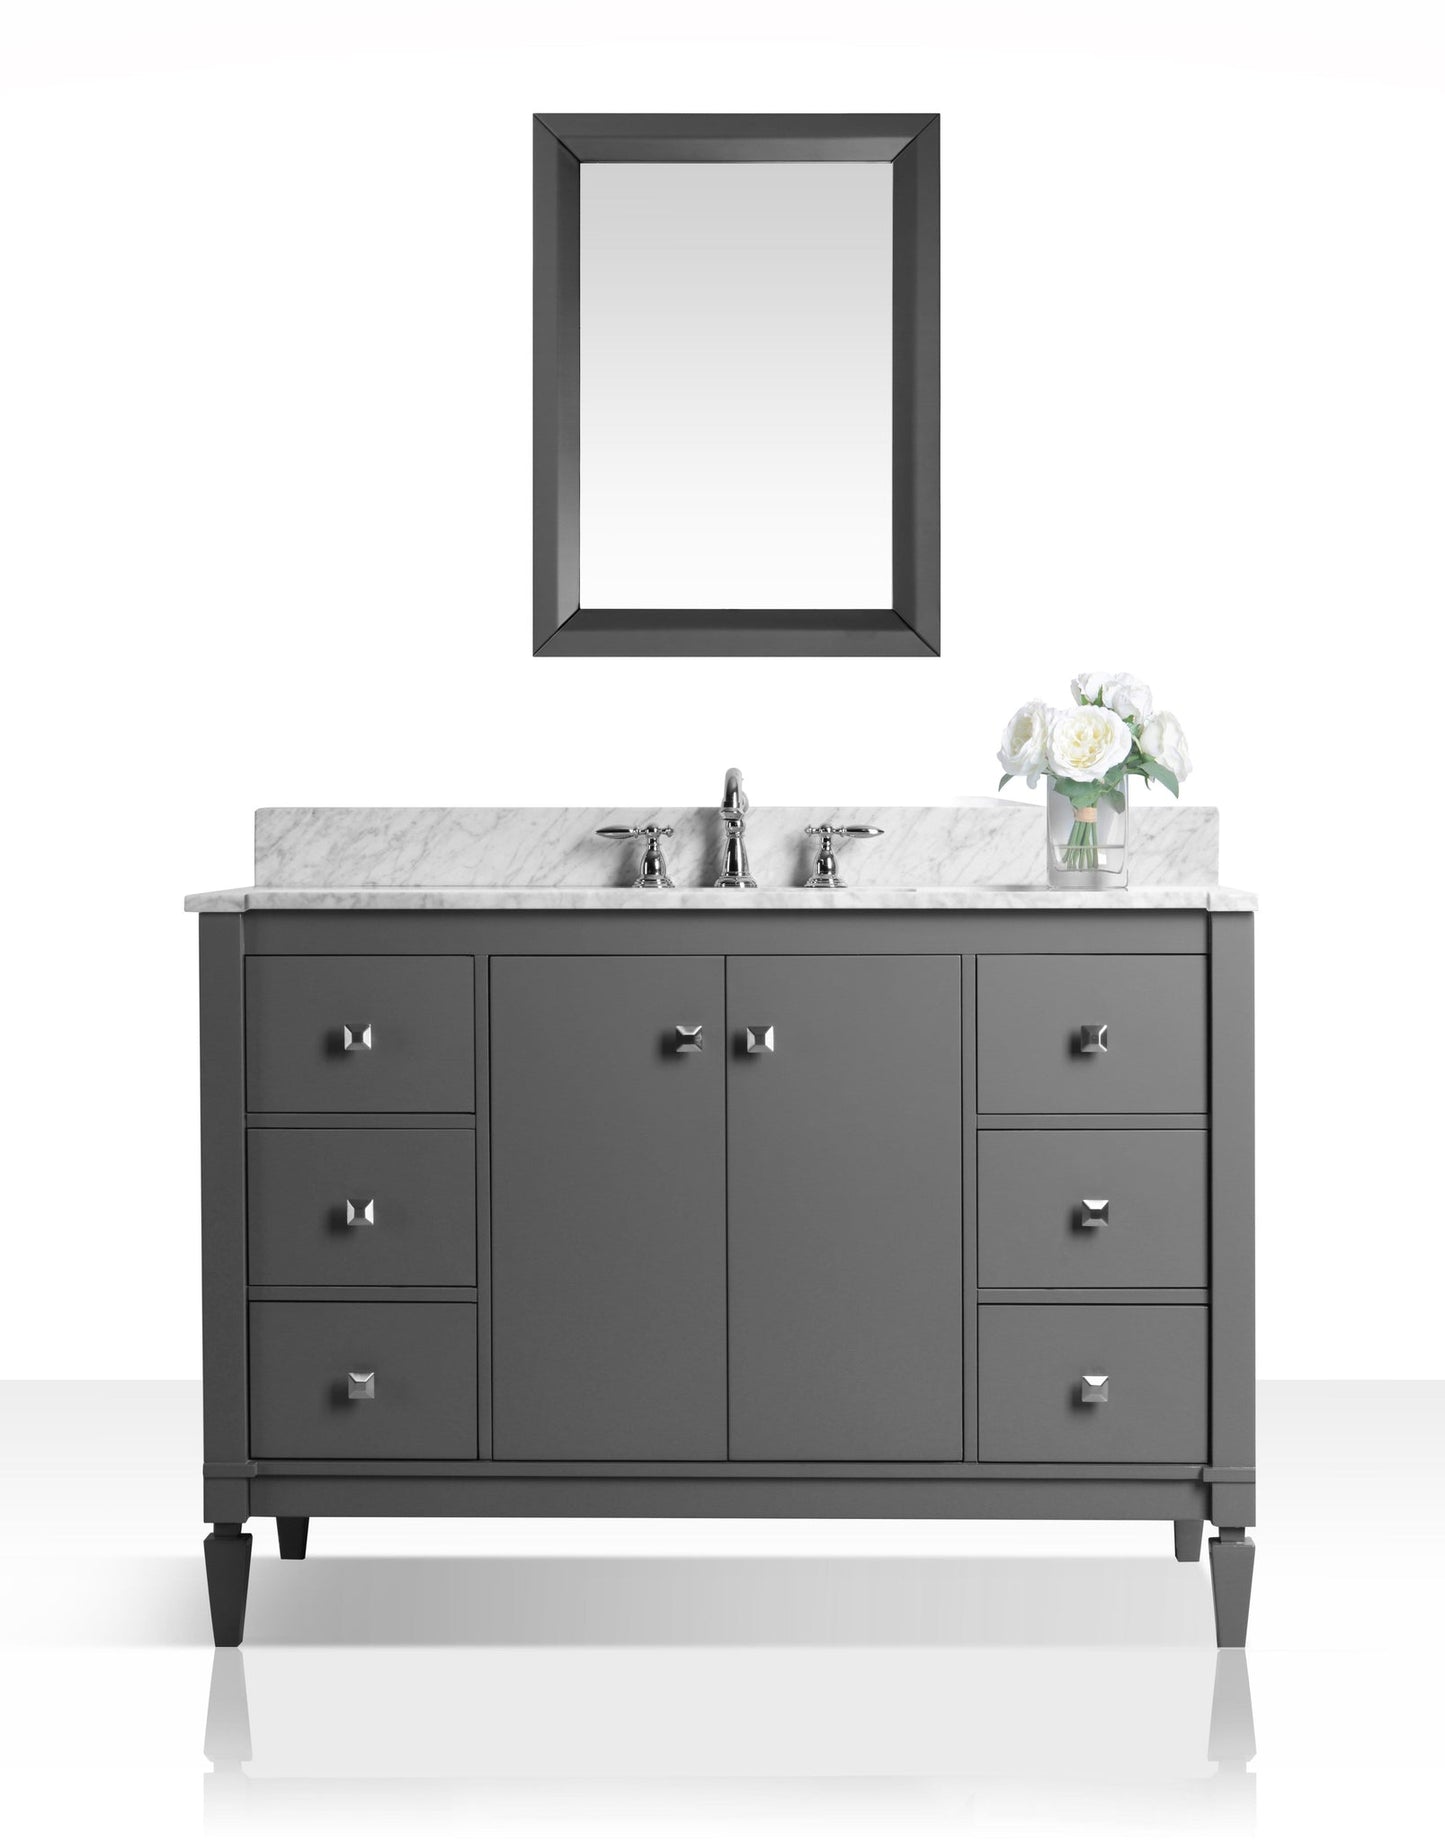 Kayleigh 48 in. Bath Vanity Set in Sapphire Gray with 28 in. Mirror and Carrara White Marble Countertop